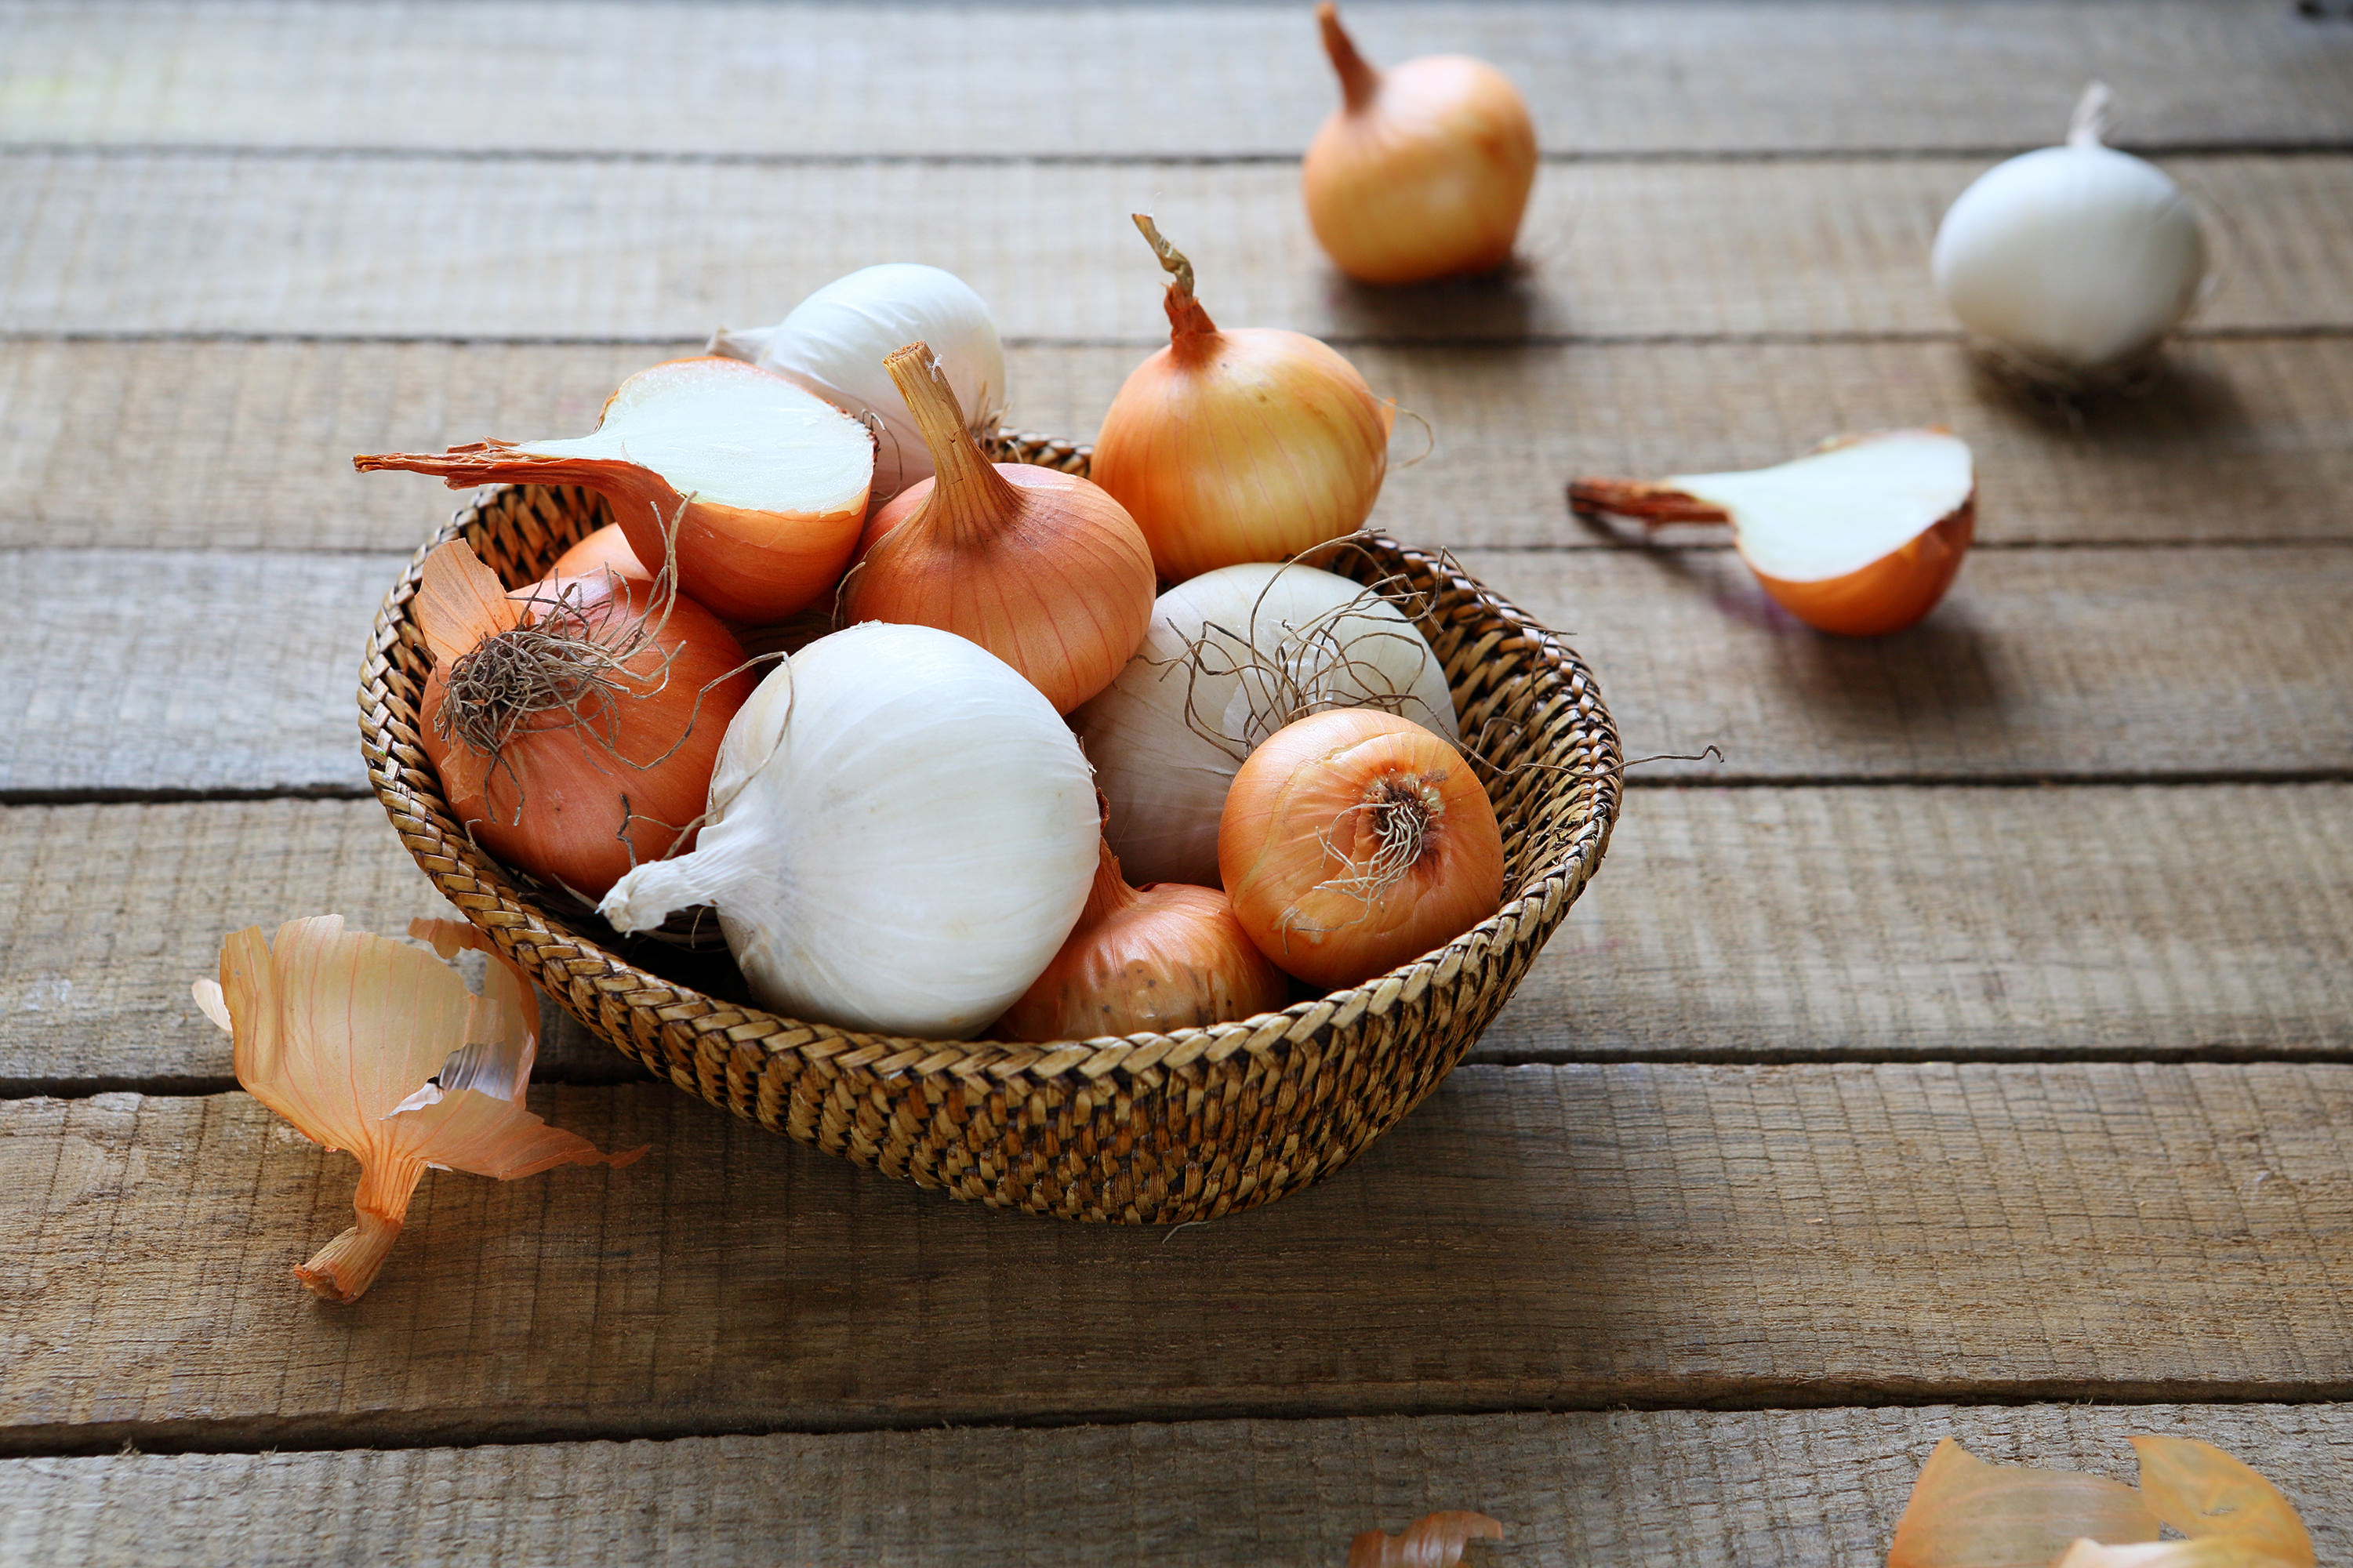 8 Ways Onions Can Heal You!